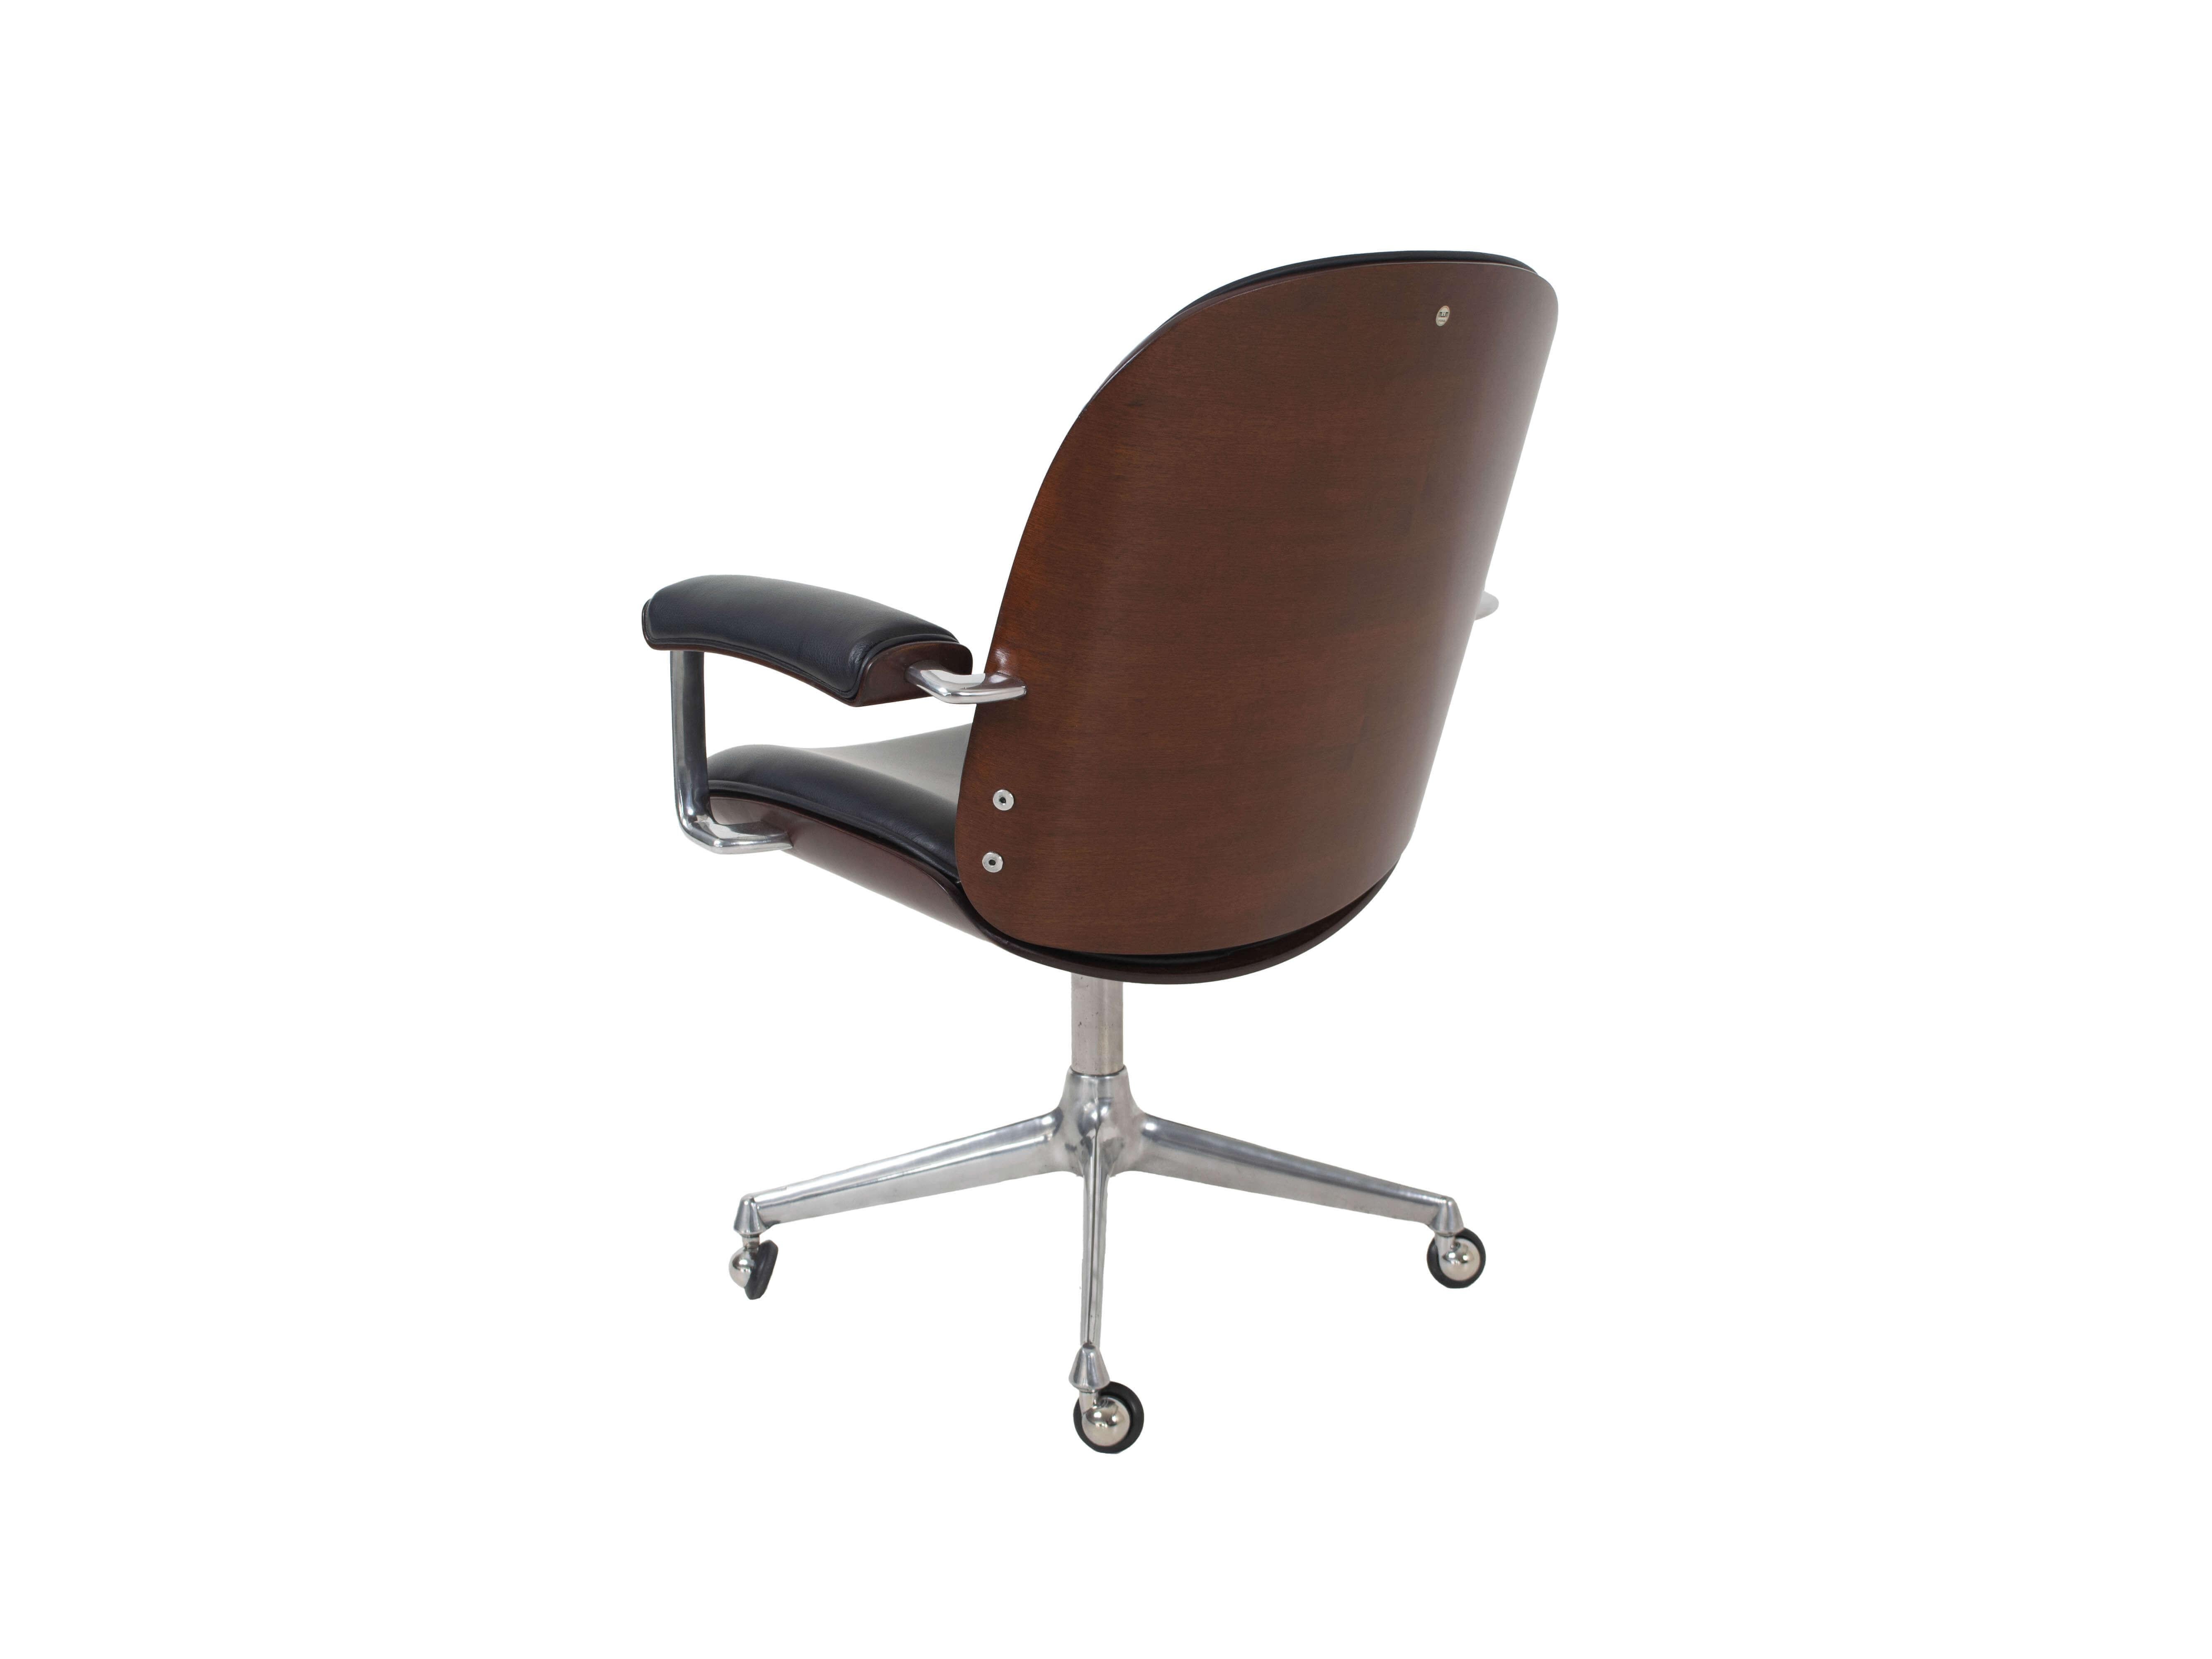 Mid-Century Modern Early Model Ico Parisi Desk Chair with Arm Rests by MIM Roma, Italy 1959 For Sale